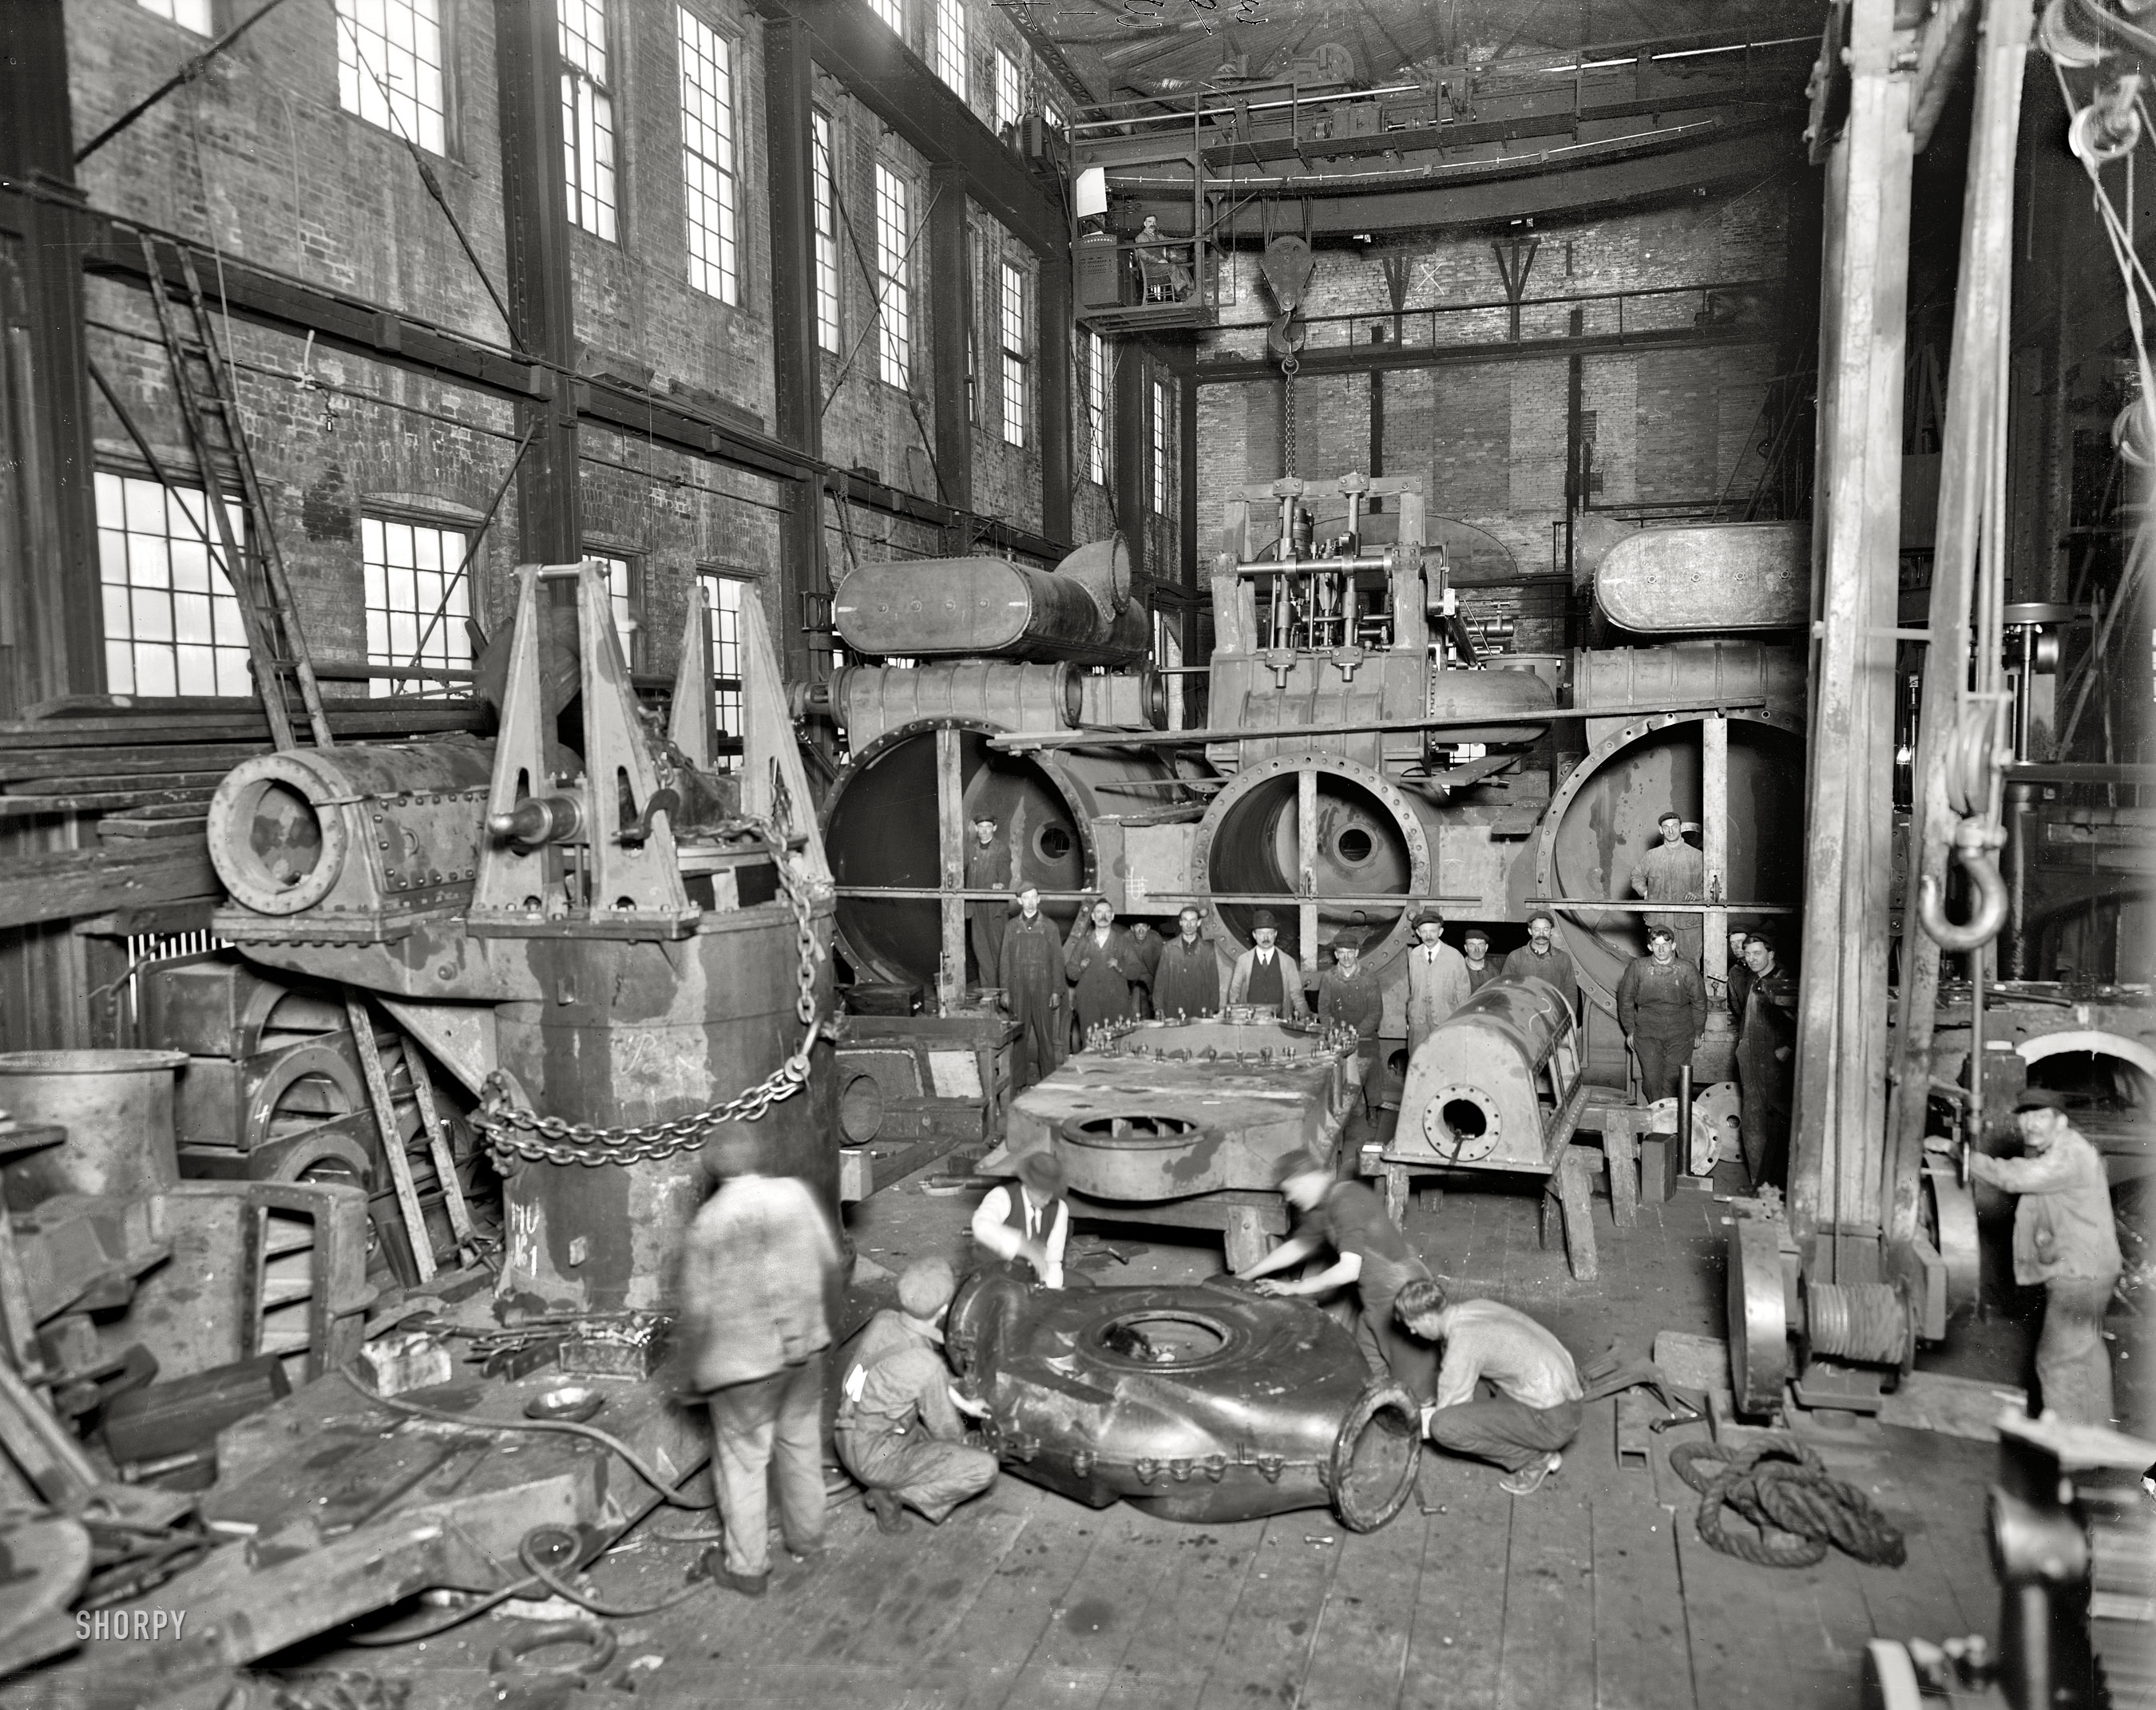 Wyandotte, Michigan, circa 1912. "Detroit Ship Building Co. Steamer No. 190, main engine in shop, three-cylinder compound-inclined type, (66 x 66 x 96) / 108 inches." 8x10 inch glass negative, Detroit Publishing Company. View full size.